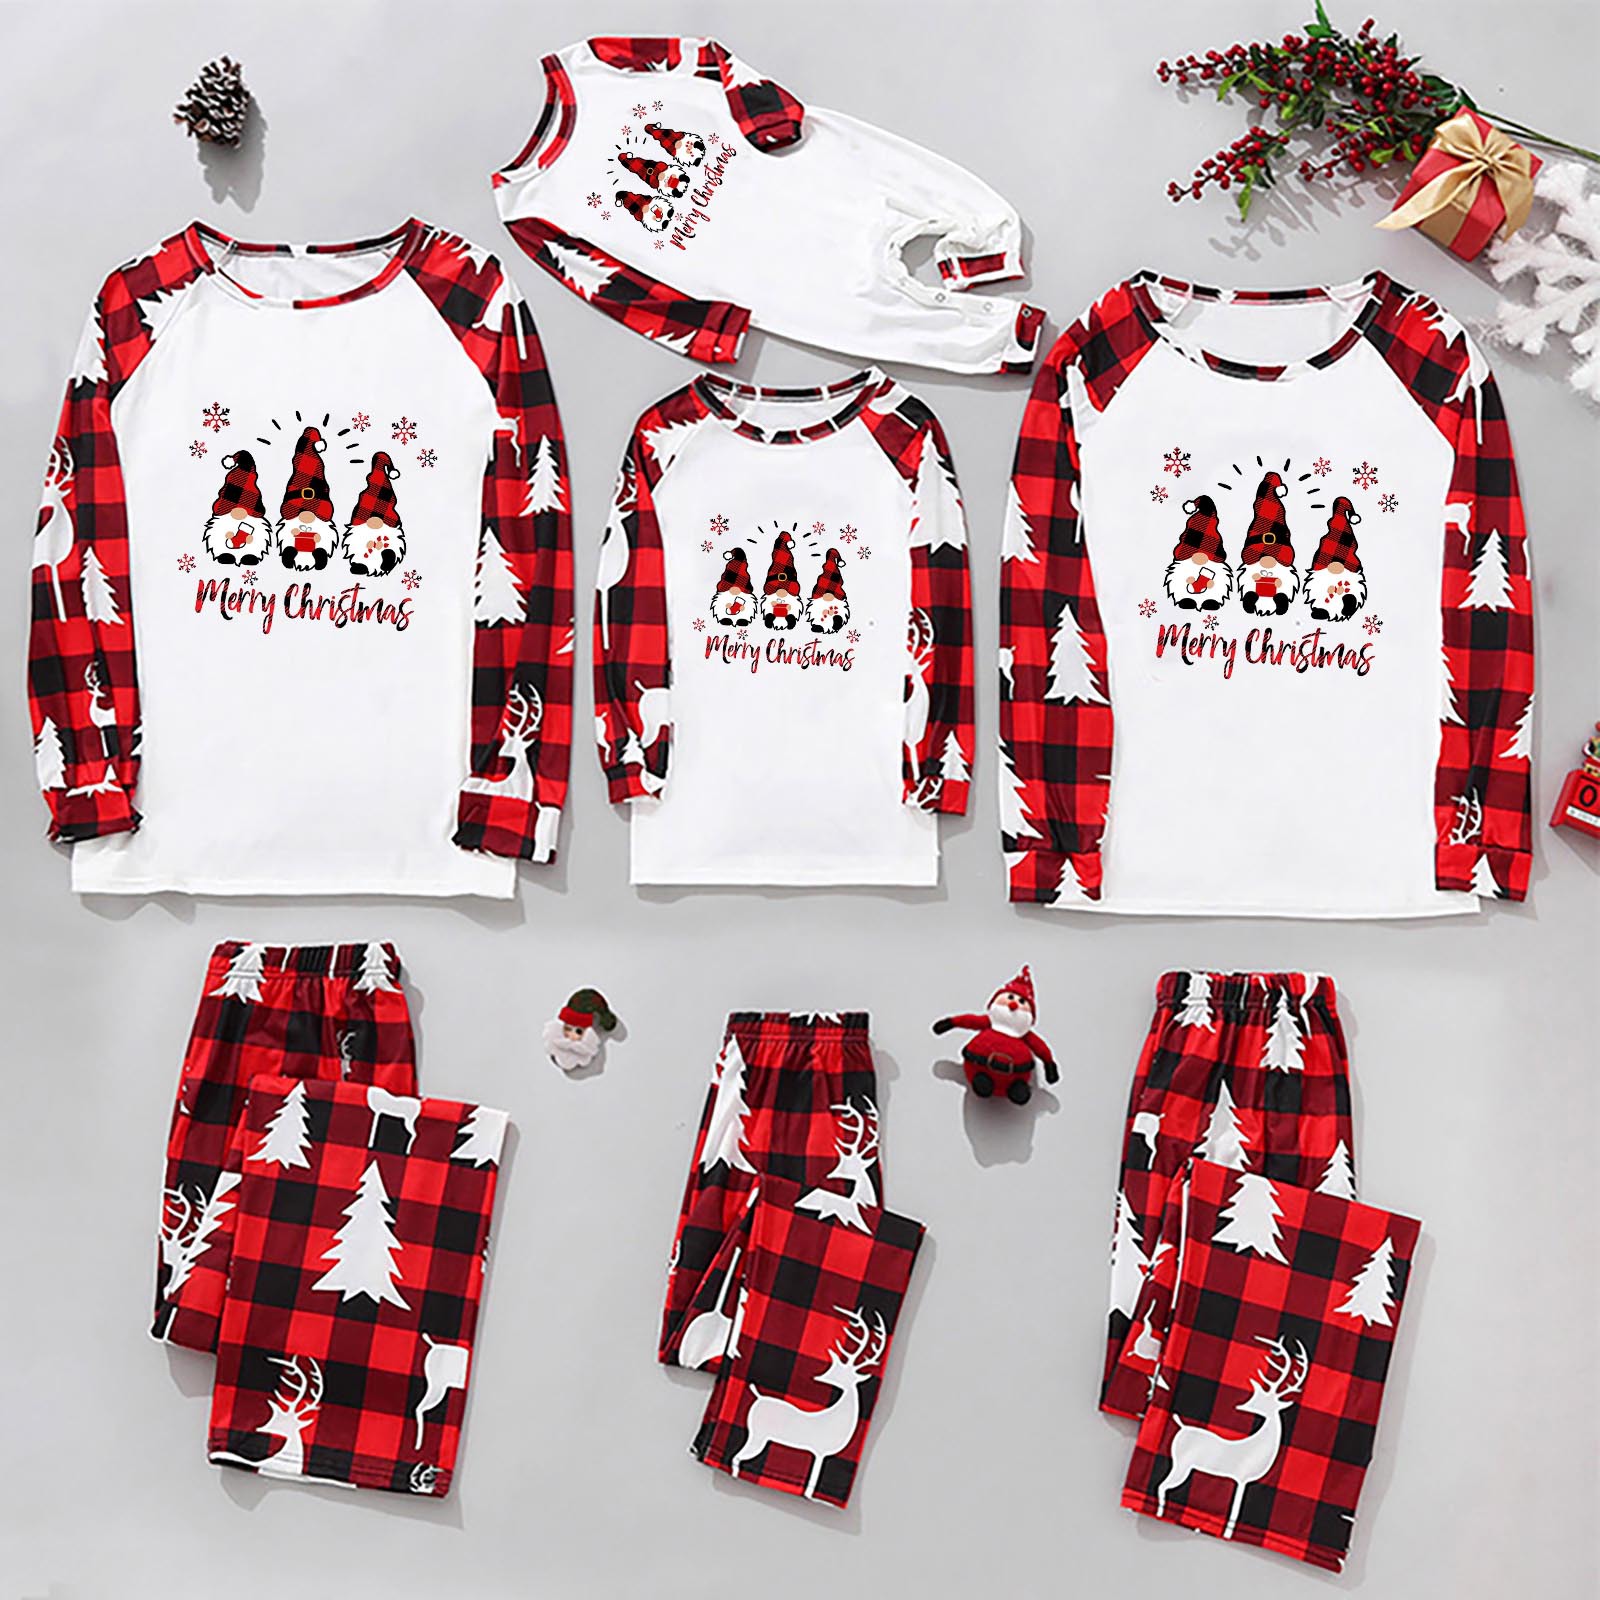 Christmas Family Pajamas Set with Plaid and Printed Patchwork Design - Perfect for Cozy Nights at Home